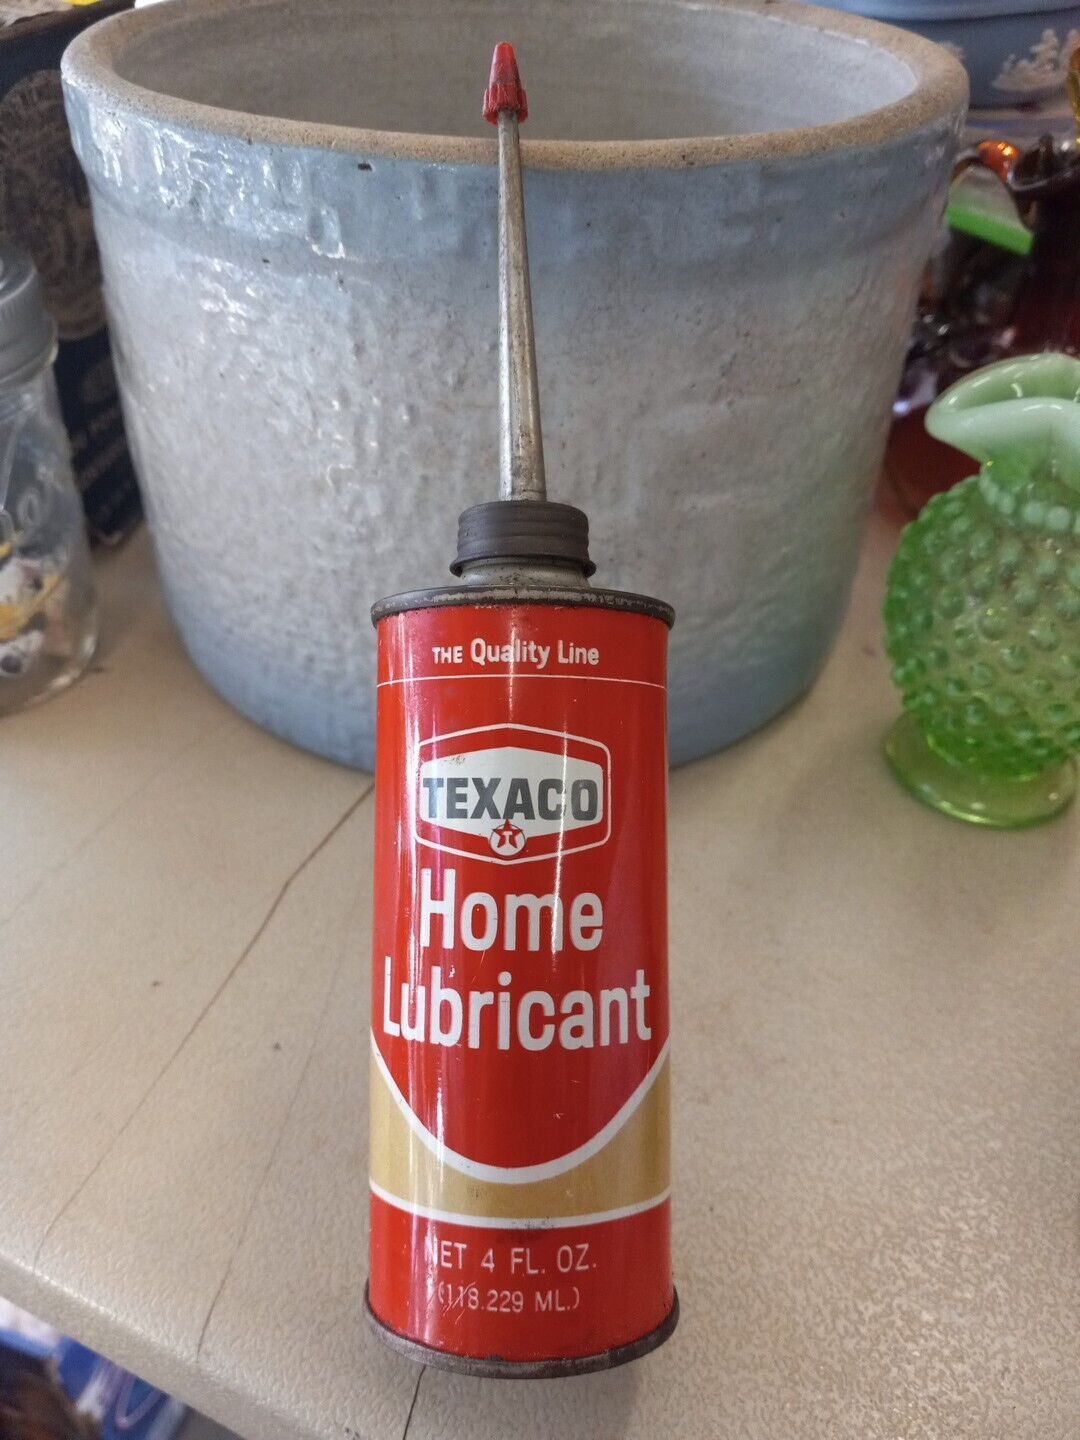 VINTAGE Display Advertising TEXACO 4 oz CAN OF HOME LUBRICANT